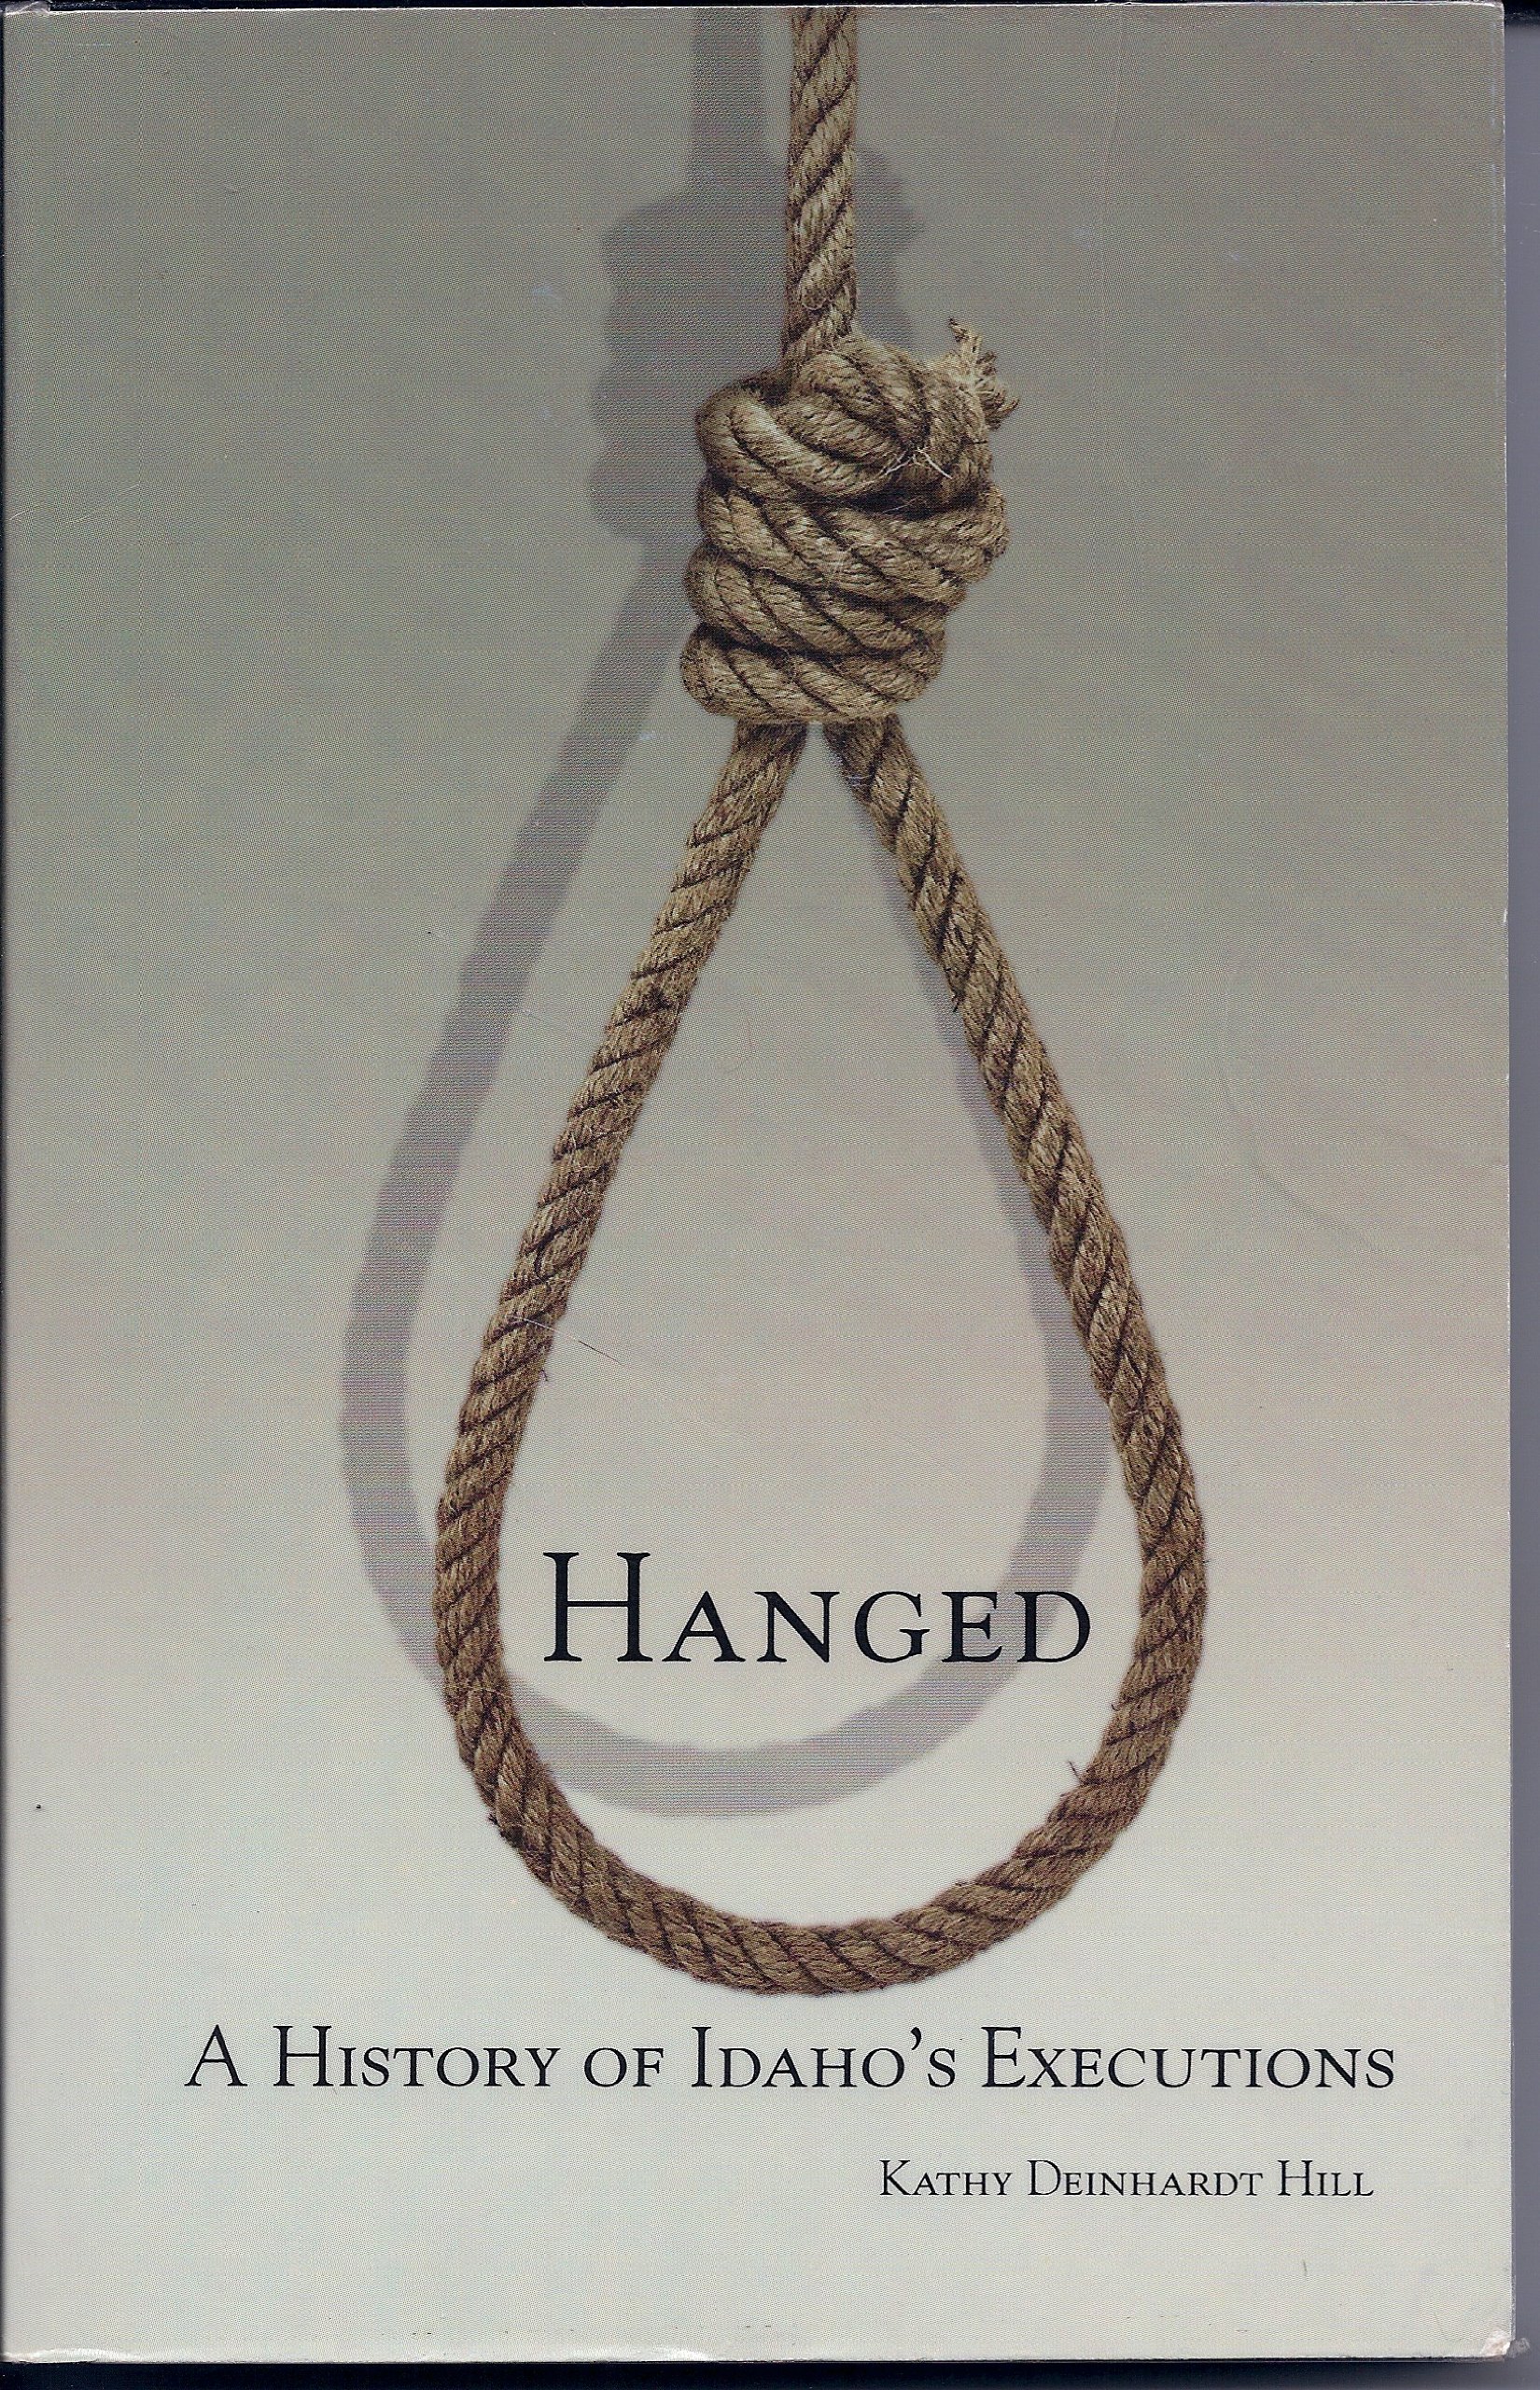 Hanged: A history of Idaho's executions (book cover)